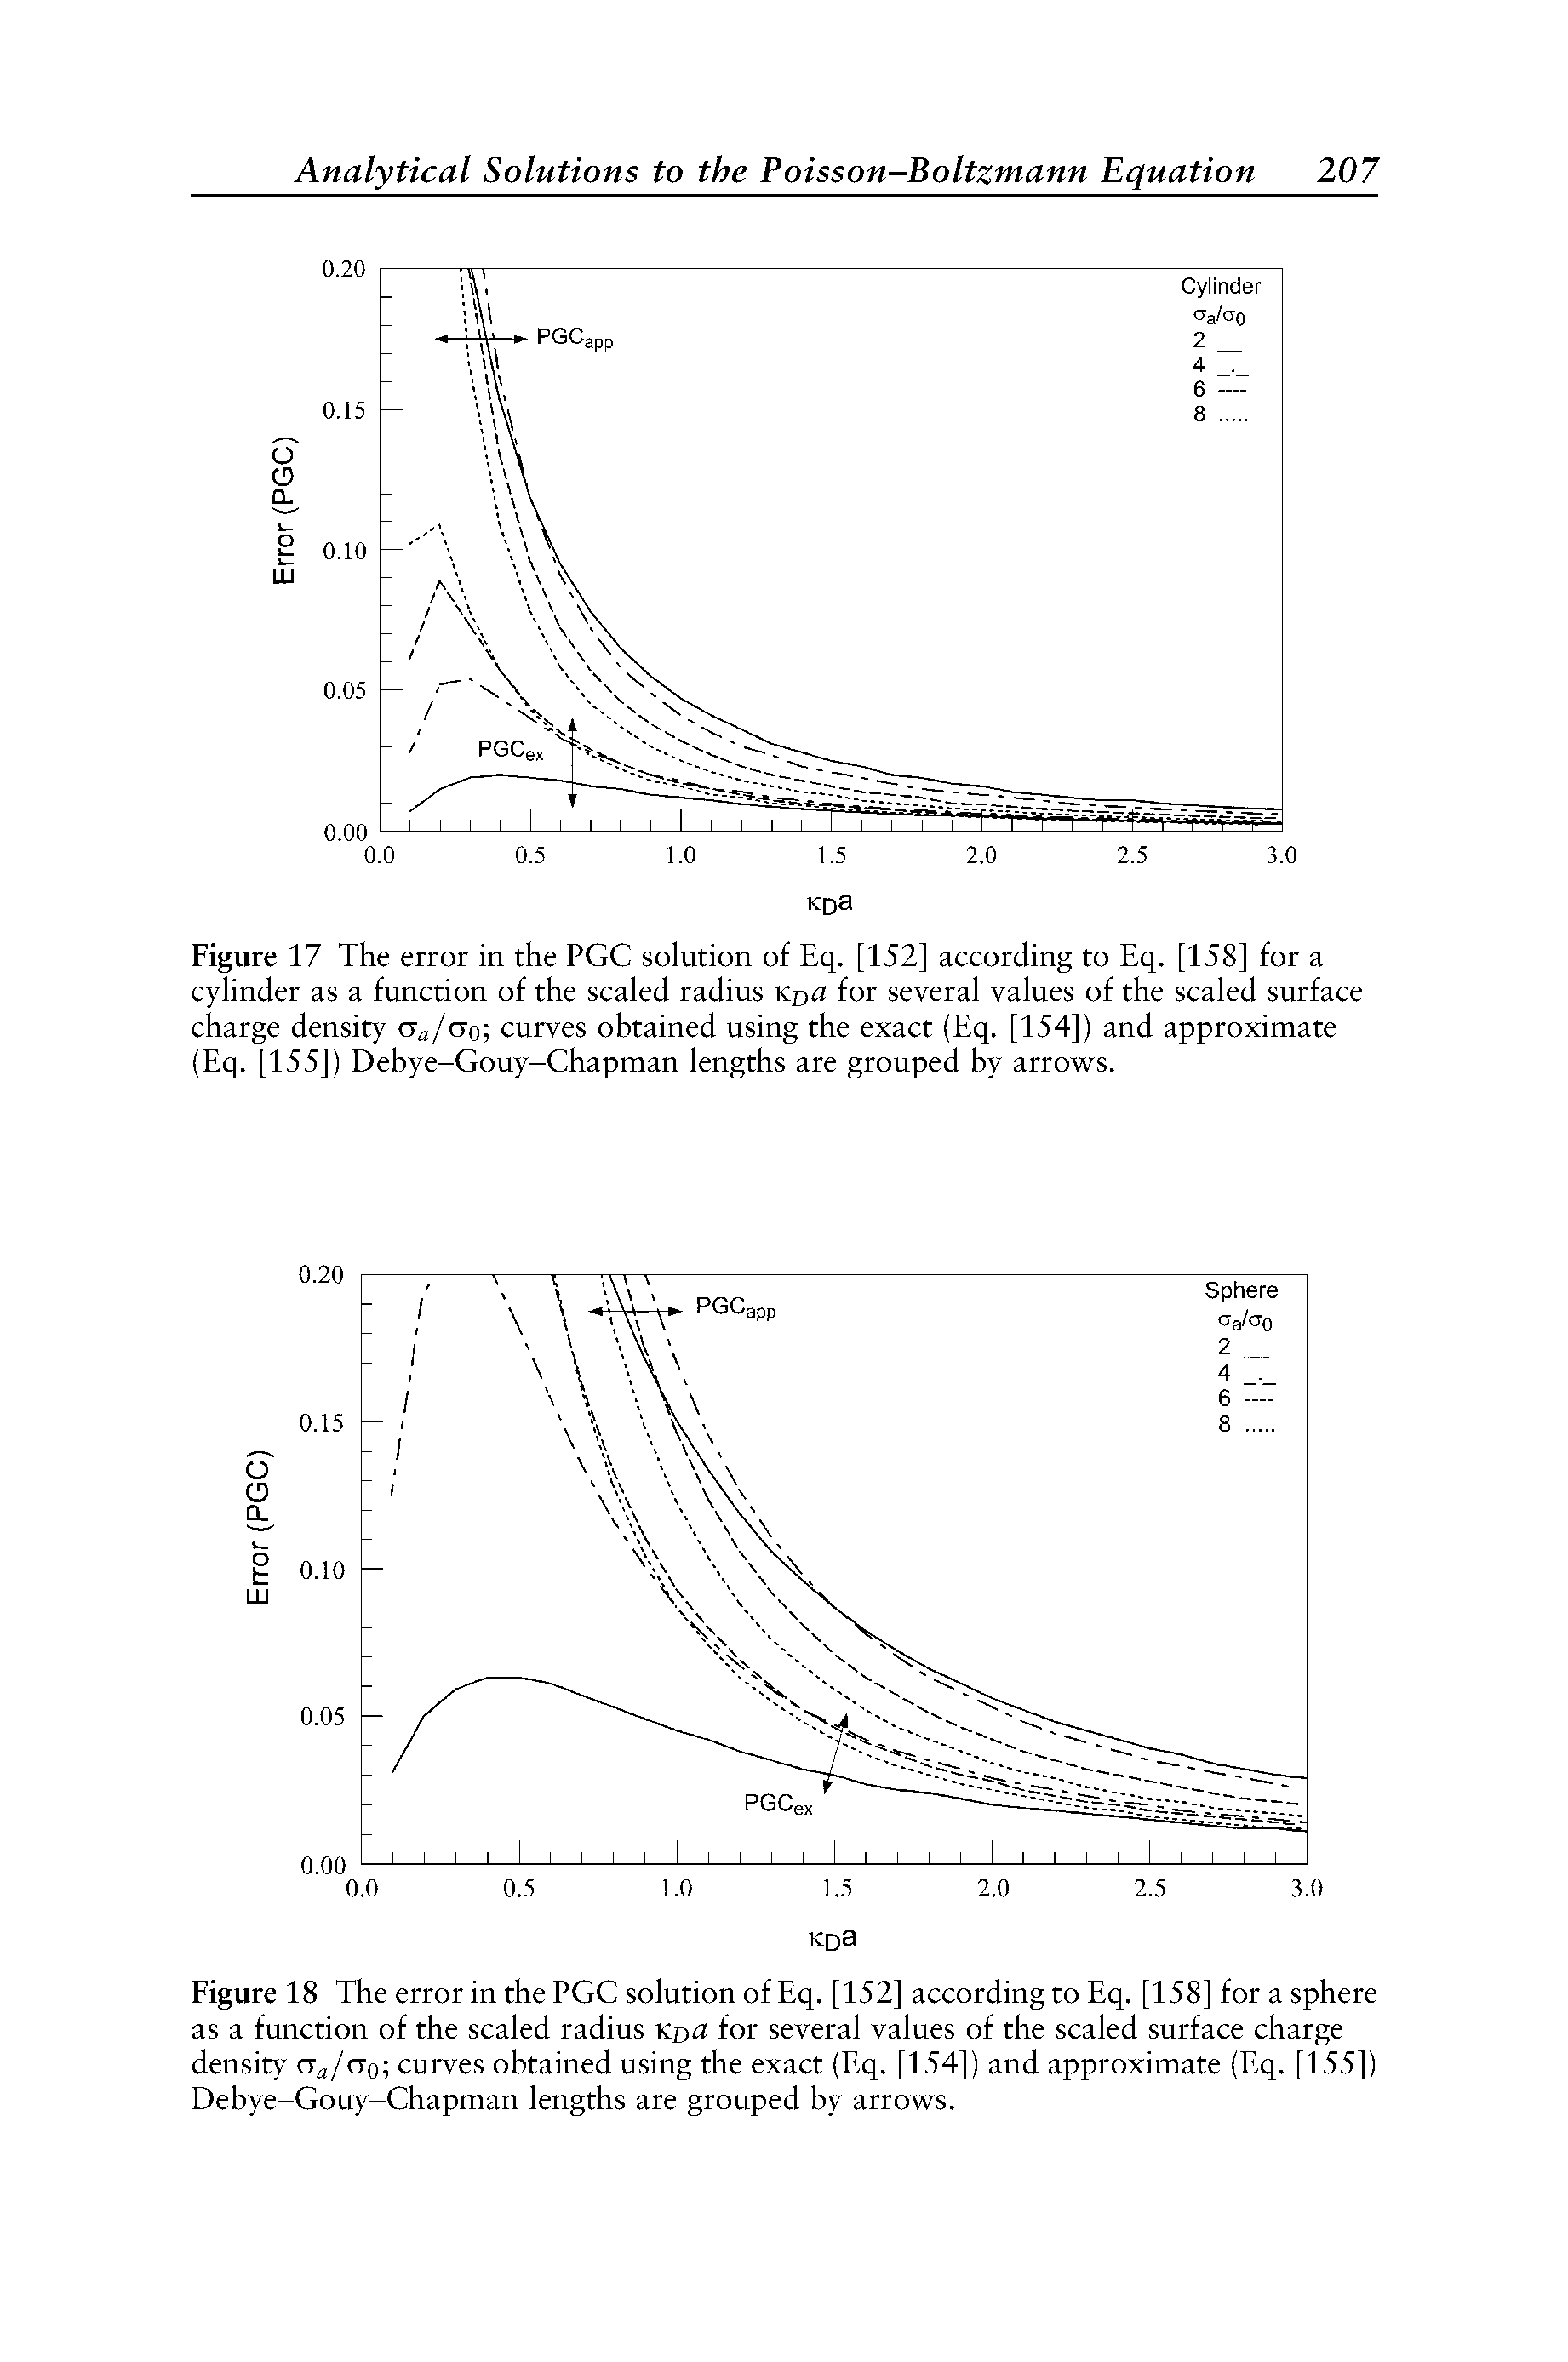 Figure 17 The error in the PGC solution of Eq. [152] according to Eq. [158] for a cylinder as a function of the scaled radius Ki,a for several values of the scaled surface charge density a /ao curves obtained using the exact (Eq. [154]) and approximate (Eq. [155]) Debye-Gouy-Chapman lengths are grouped by arrows.